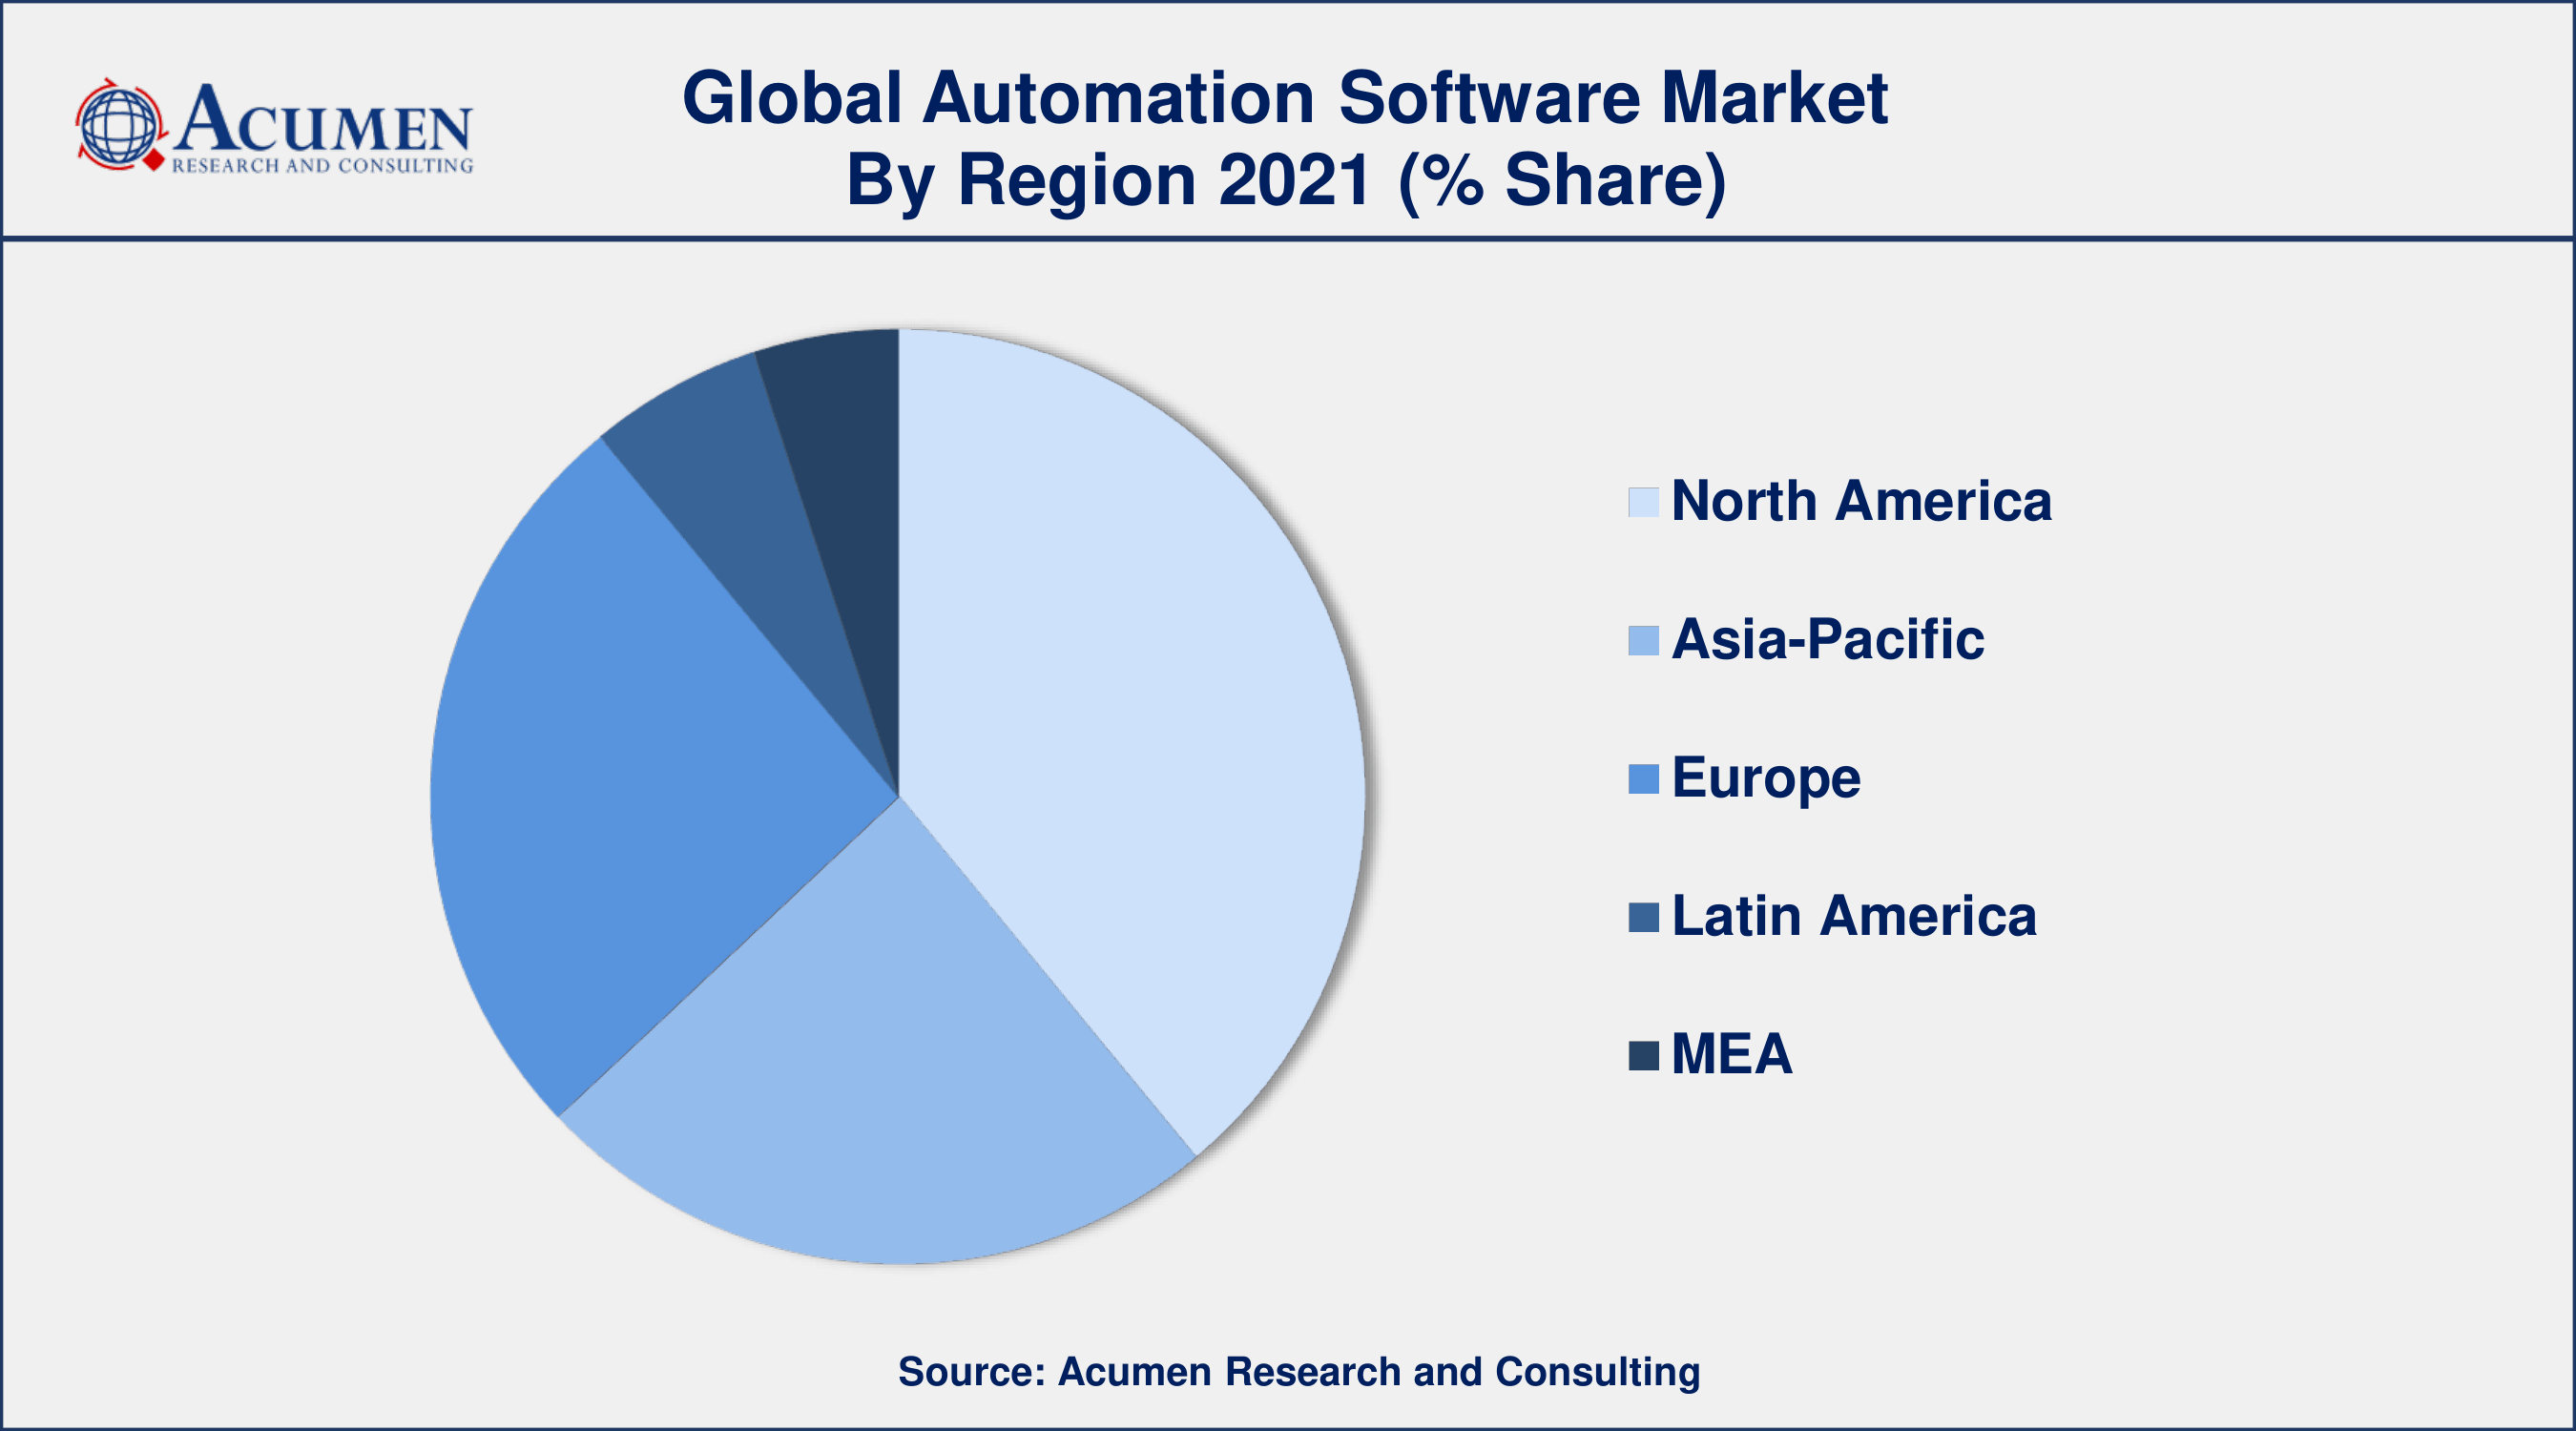 Asia-Pacific automation software market trend will observe fastest CAGR from 2022 to 2030